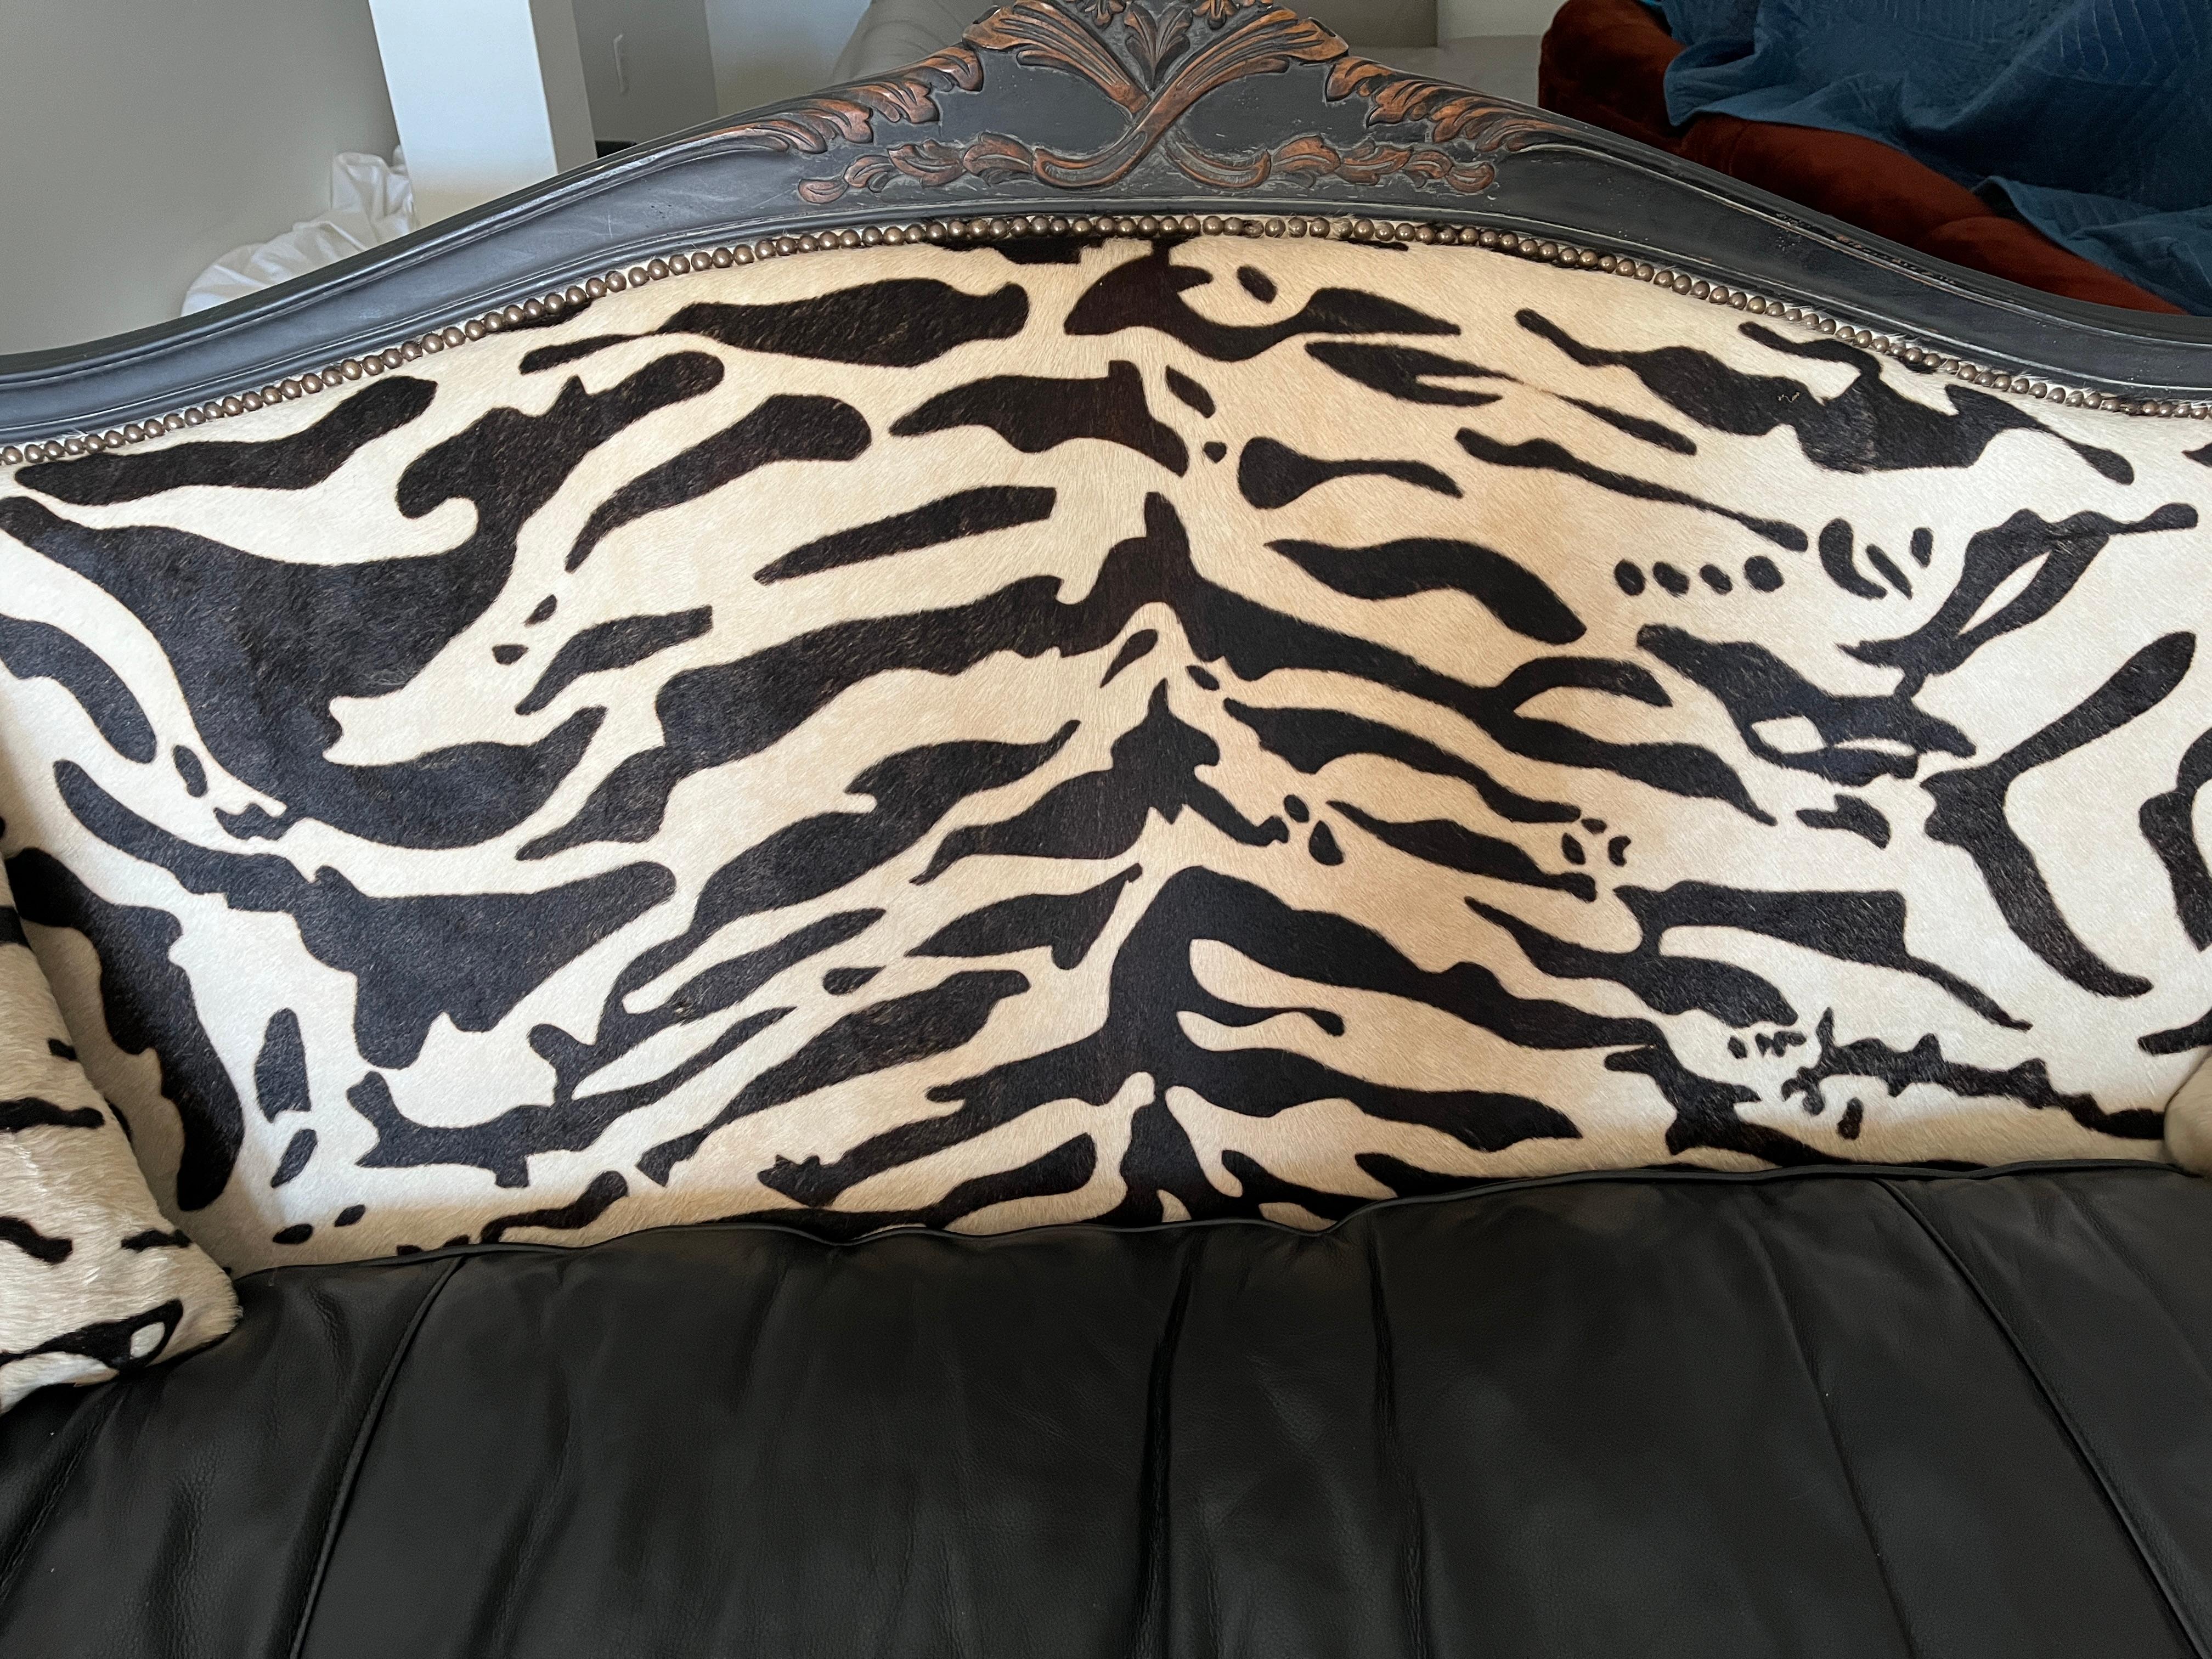 Carved Old Hickory Tannery Sofas/Zebra Print Cowhair, Leather. Suede & Nailhead Trim